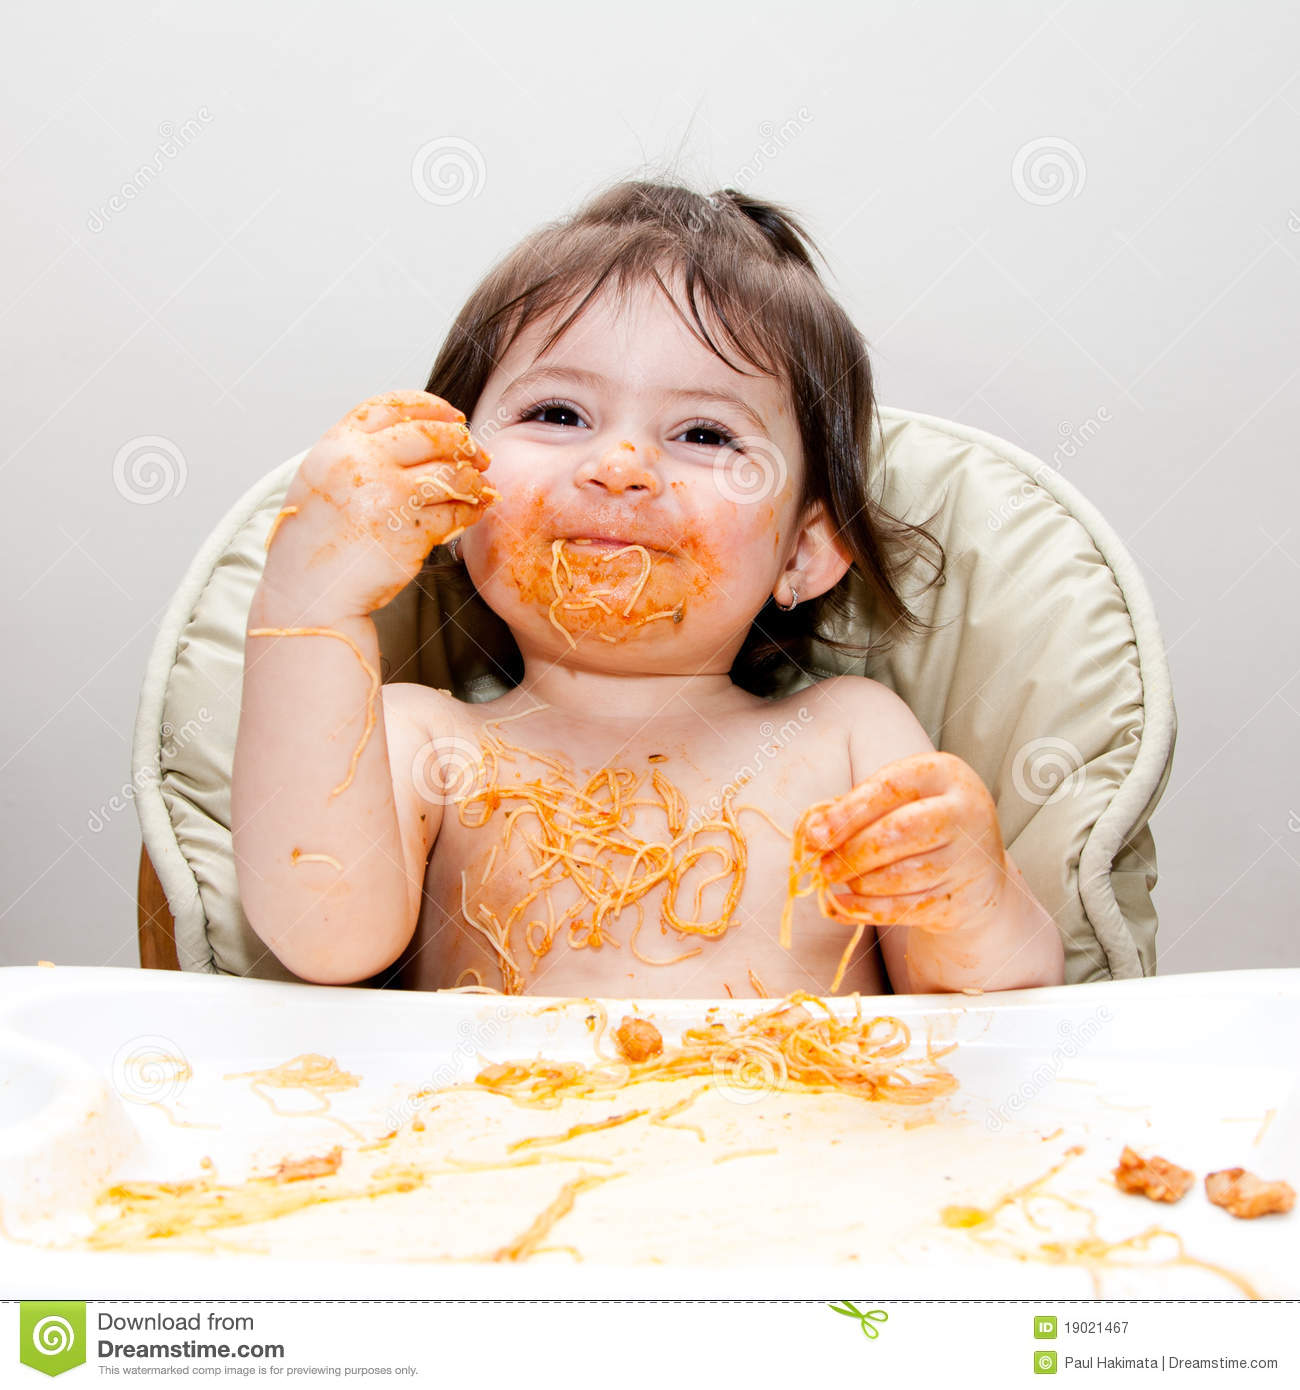 Happy Smiling Baby Having Fun Eating Messy Covered In Spaghetti Angel